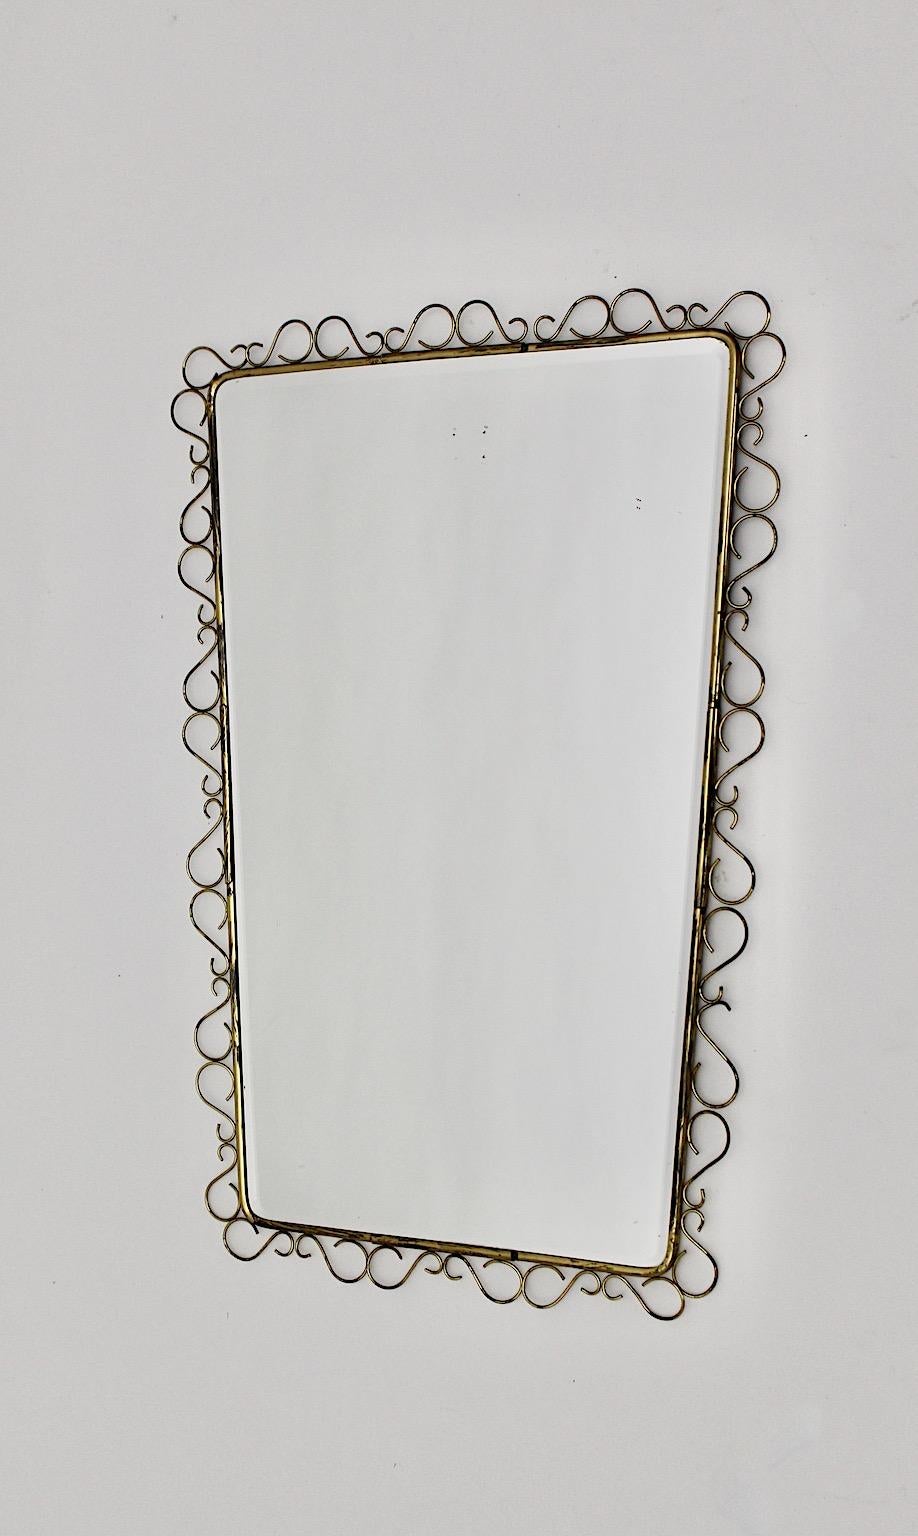 Mid Century Modern vintage wall mirror or floor mirror from brass and mirror glass 1950s Italy.
A stunning wall mirror with delicate loops from brass with brass frame in rectangular conical shape.
The delicate loops run around the frame and provide